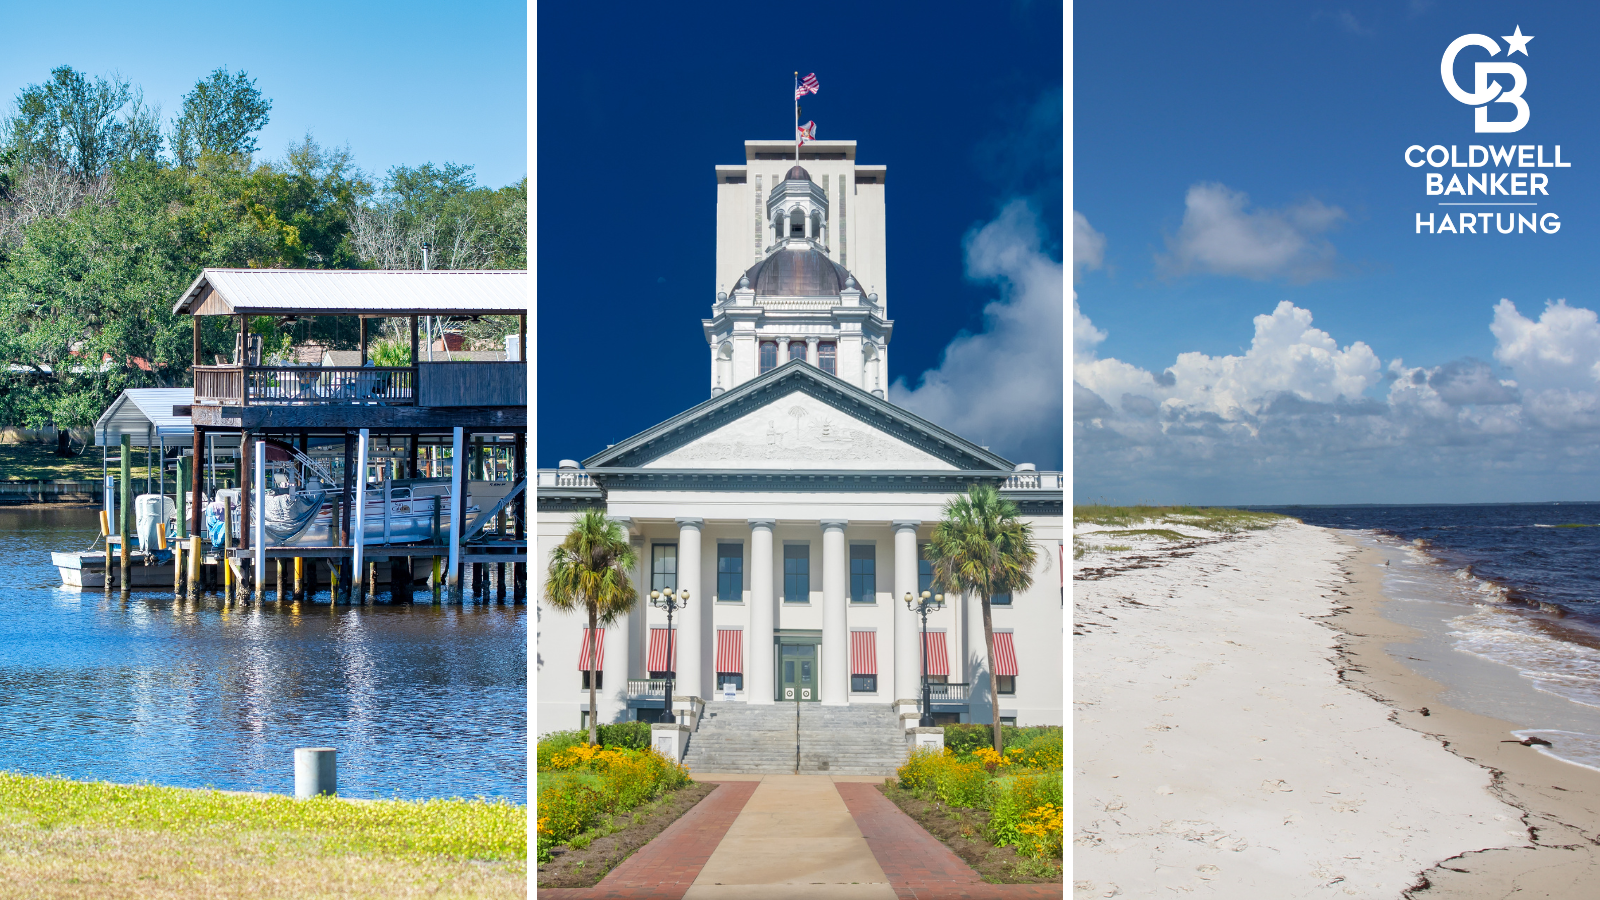 Find your second home or vacation home in Tallahassee, Apalachicola or Carrabelle, Florida. 